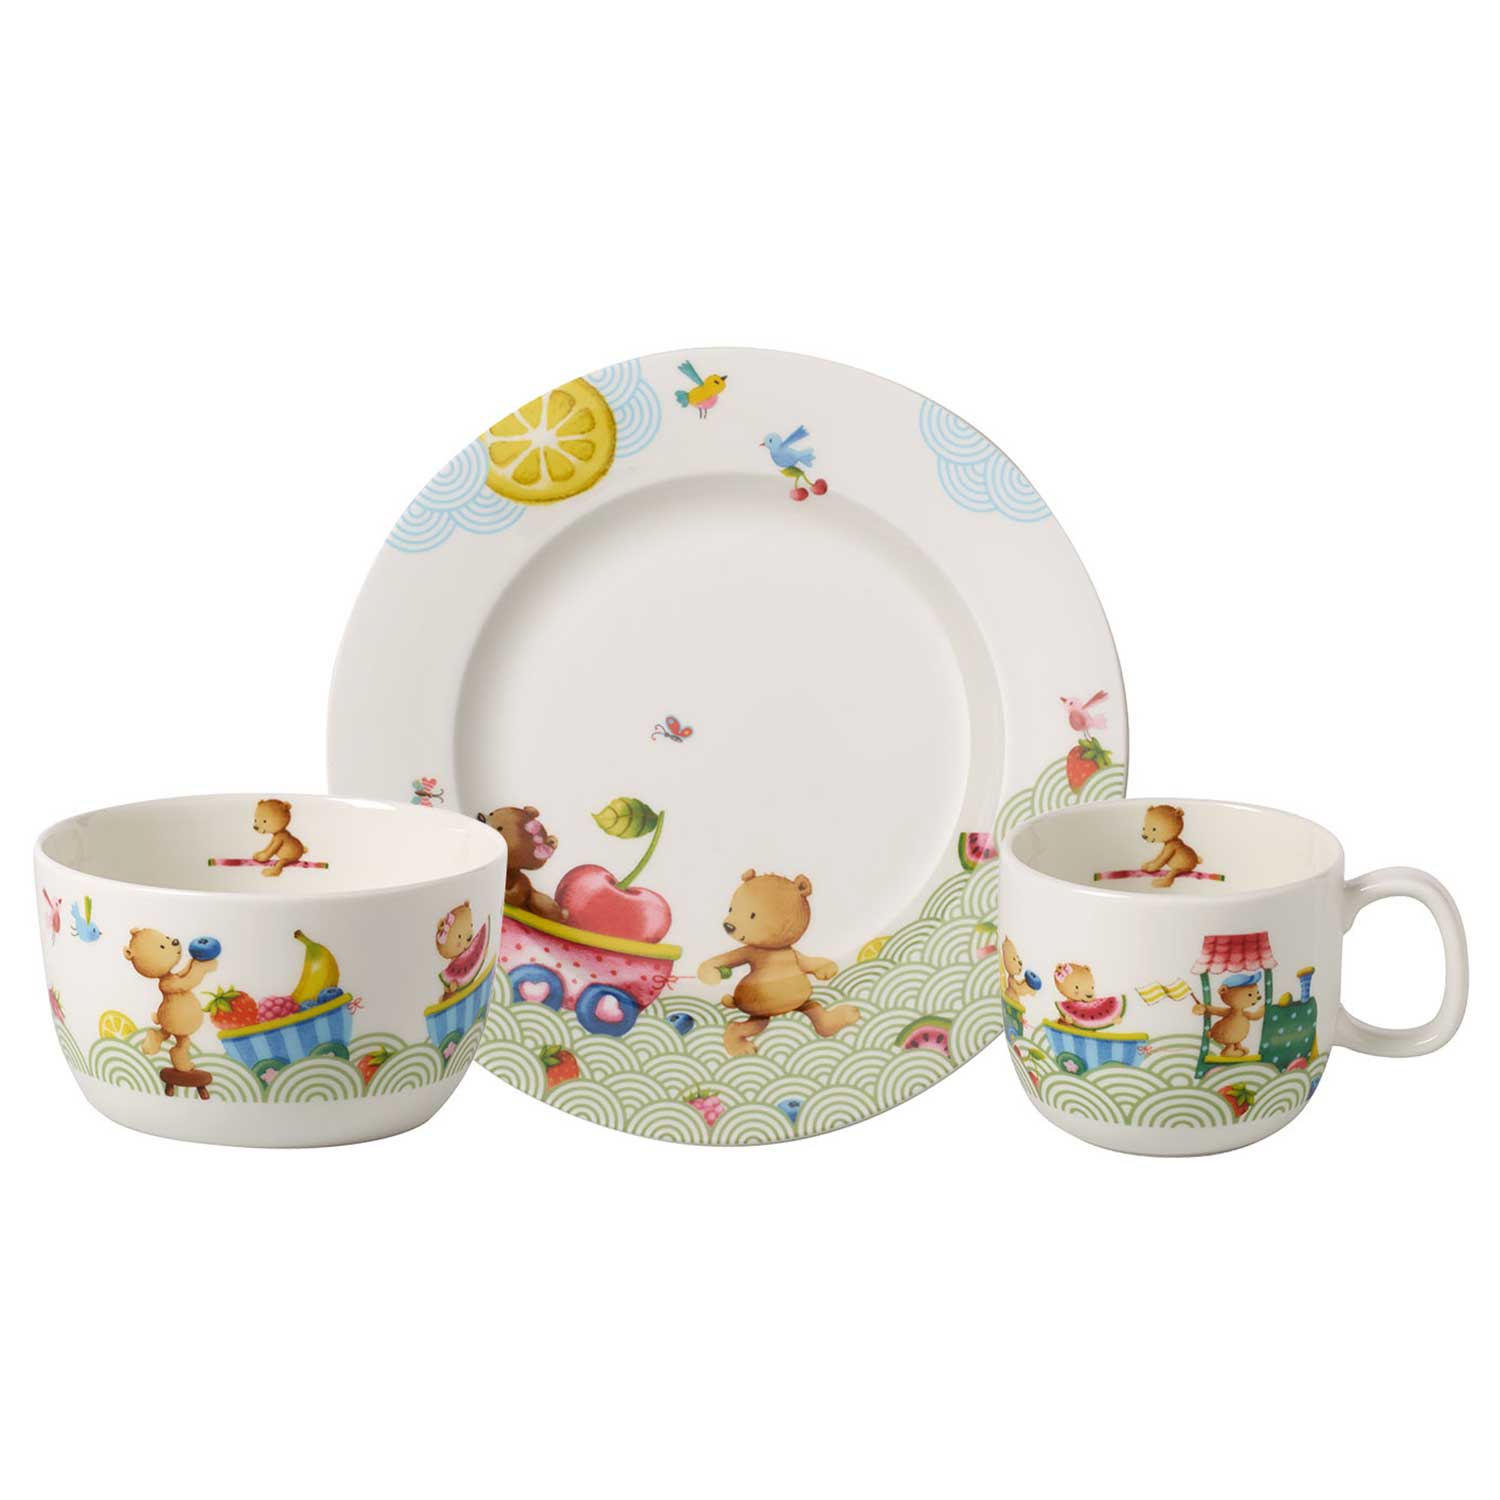 Hungry As A Bear Children’s Tableware 3 Pcs